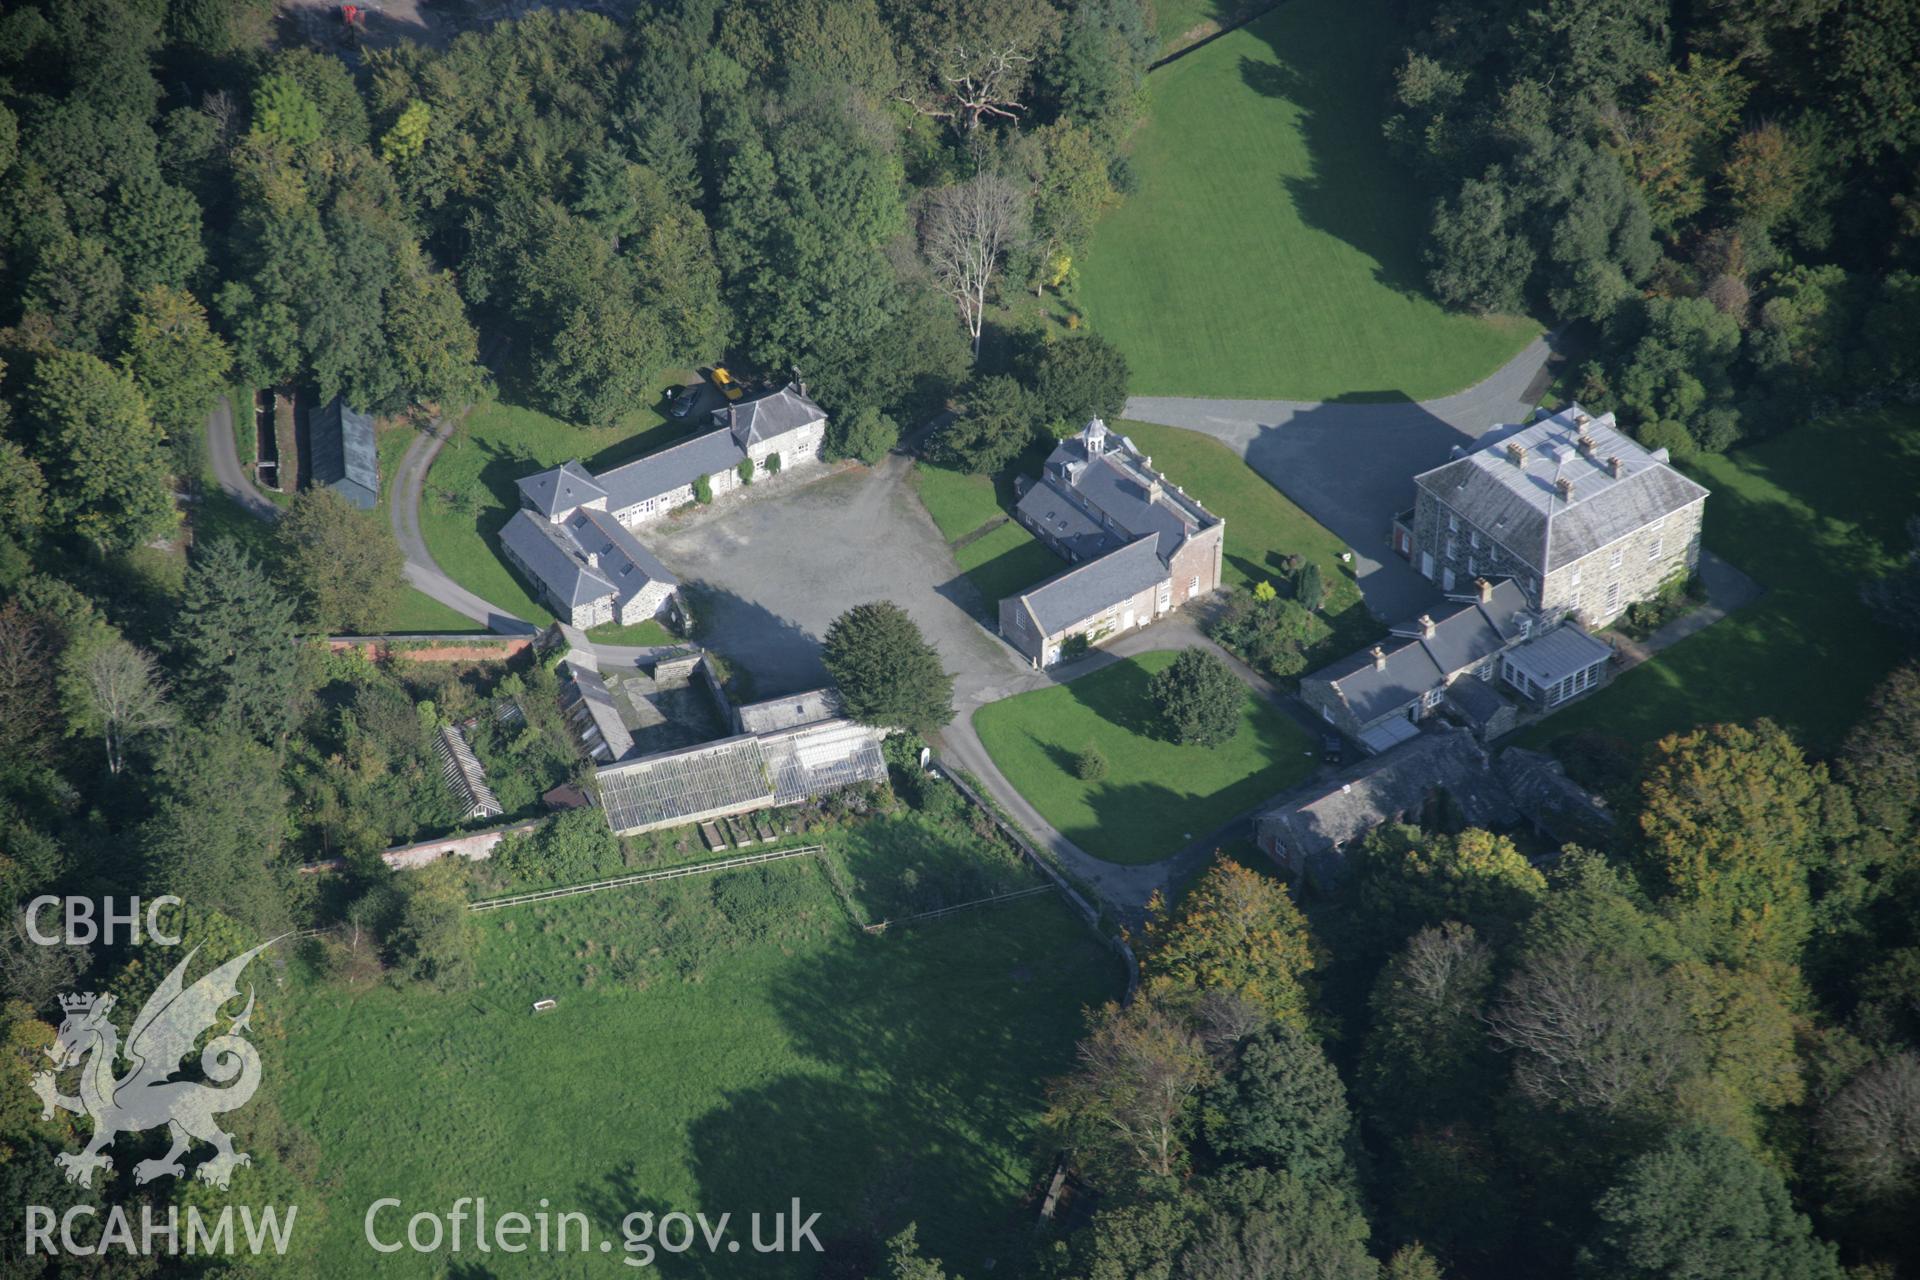 RCAHMW colour oblique aerial photograph of Peniarth Country House, viewed looking east. Taken on 17 October 2005 by Toby Driver